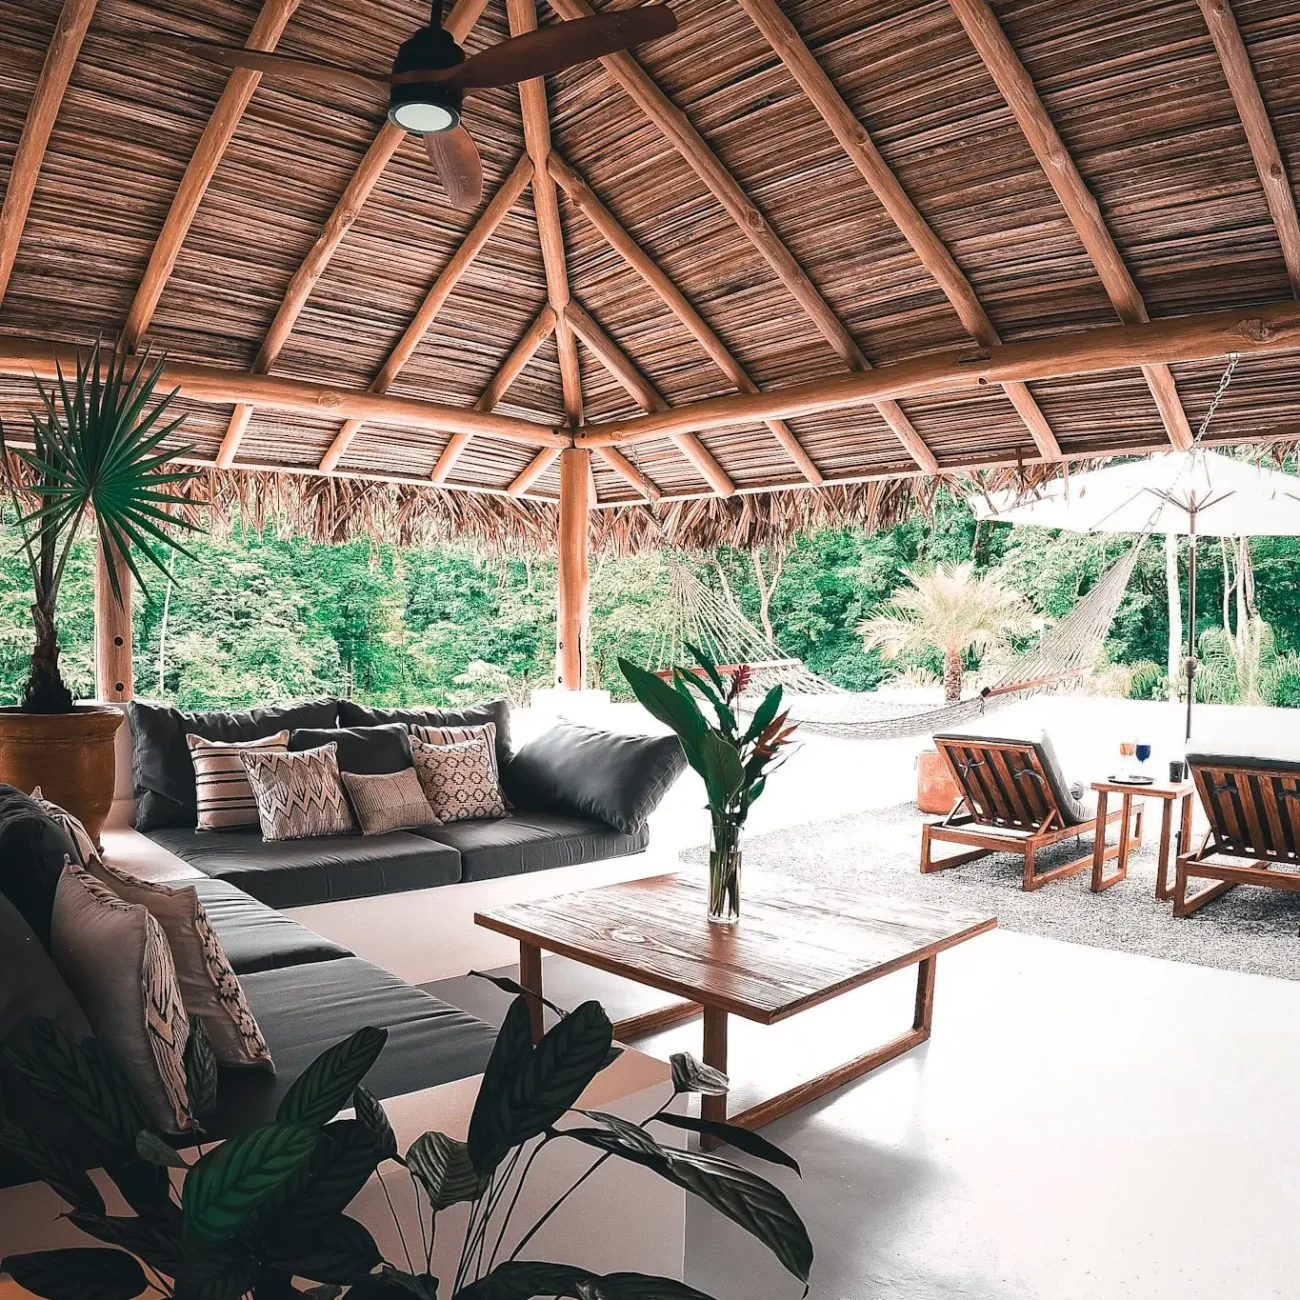 An inviting outdoor lounge area at Vayu Retreat Villas, featuring a cozy sofa set under a thatched roof gazebo with views of the lush jungle. The scene includes comfortable seating, a hammock, and a wooden coffee table, capturing the essence of one of the best hotels in Uvita, Costa Rica, known for its serene and luxurious jungle retreat atmosphere.